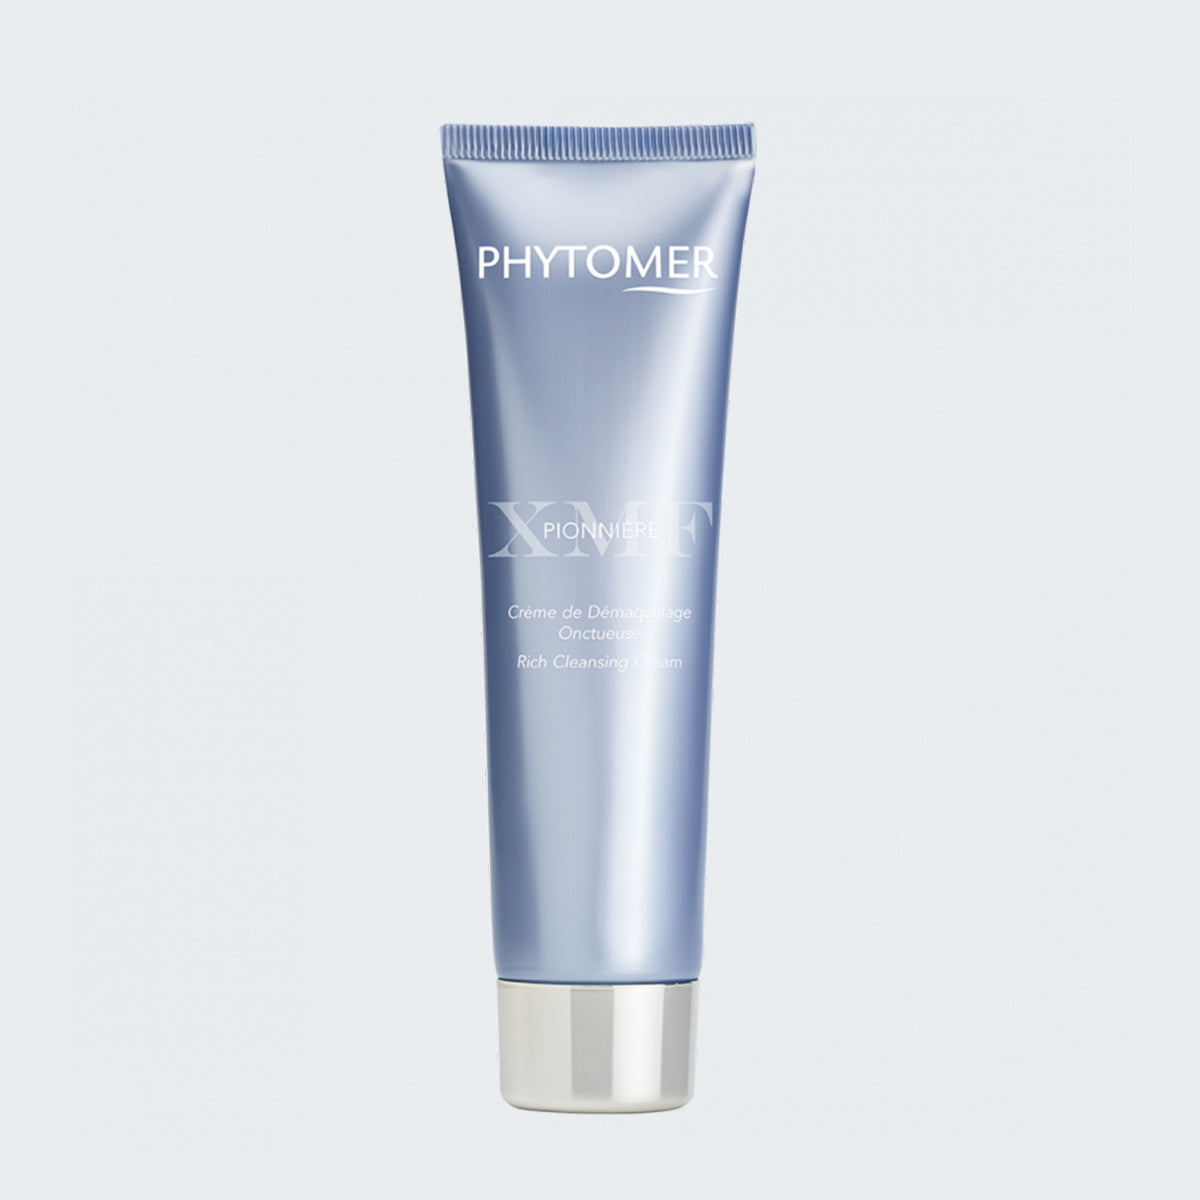 Phytomer Pionnière XMF Rich Cleansing Cream